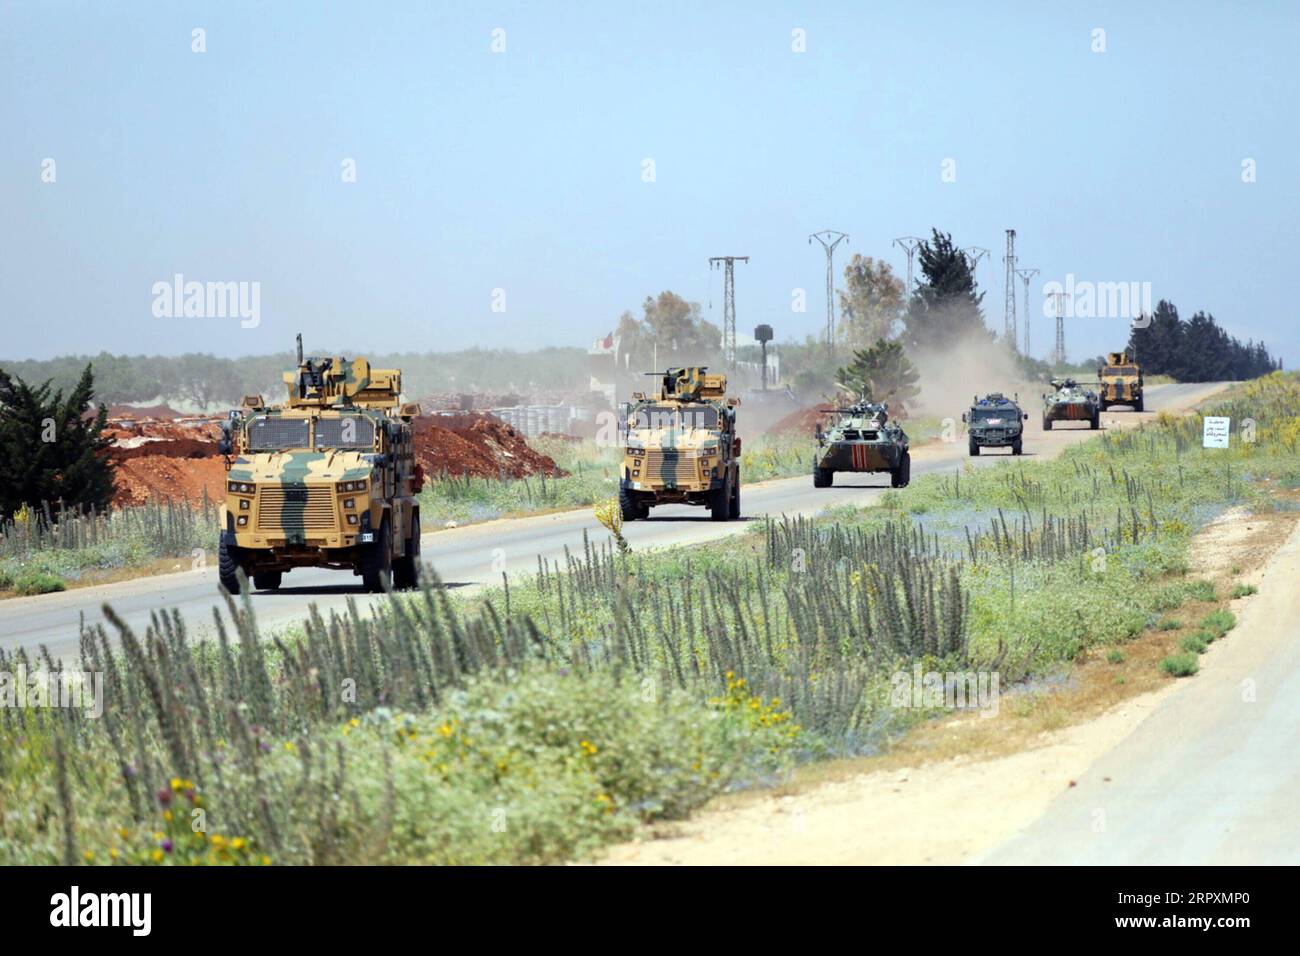 200528 -- IDLIB, May 28, 2020 Xinhua -- Military vehicles are seen during a joint patrol of Turkish and Russian troops in northwestern Idlib province of Syria, on May 28, 2020. Turkish and Russian troops conducted their 13th joint patrol along a key highway in northwestern Idlib province of Syria, the Turkish defense ministry said on Thursday. Xinhua SYRIA-IDLIB-TURKEY-RUSSIA-JOINT PATROL PUBLICATIONxNOTxINxCHN Stock Photo